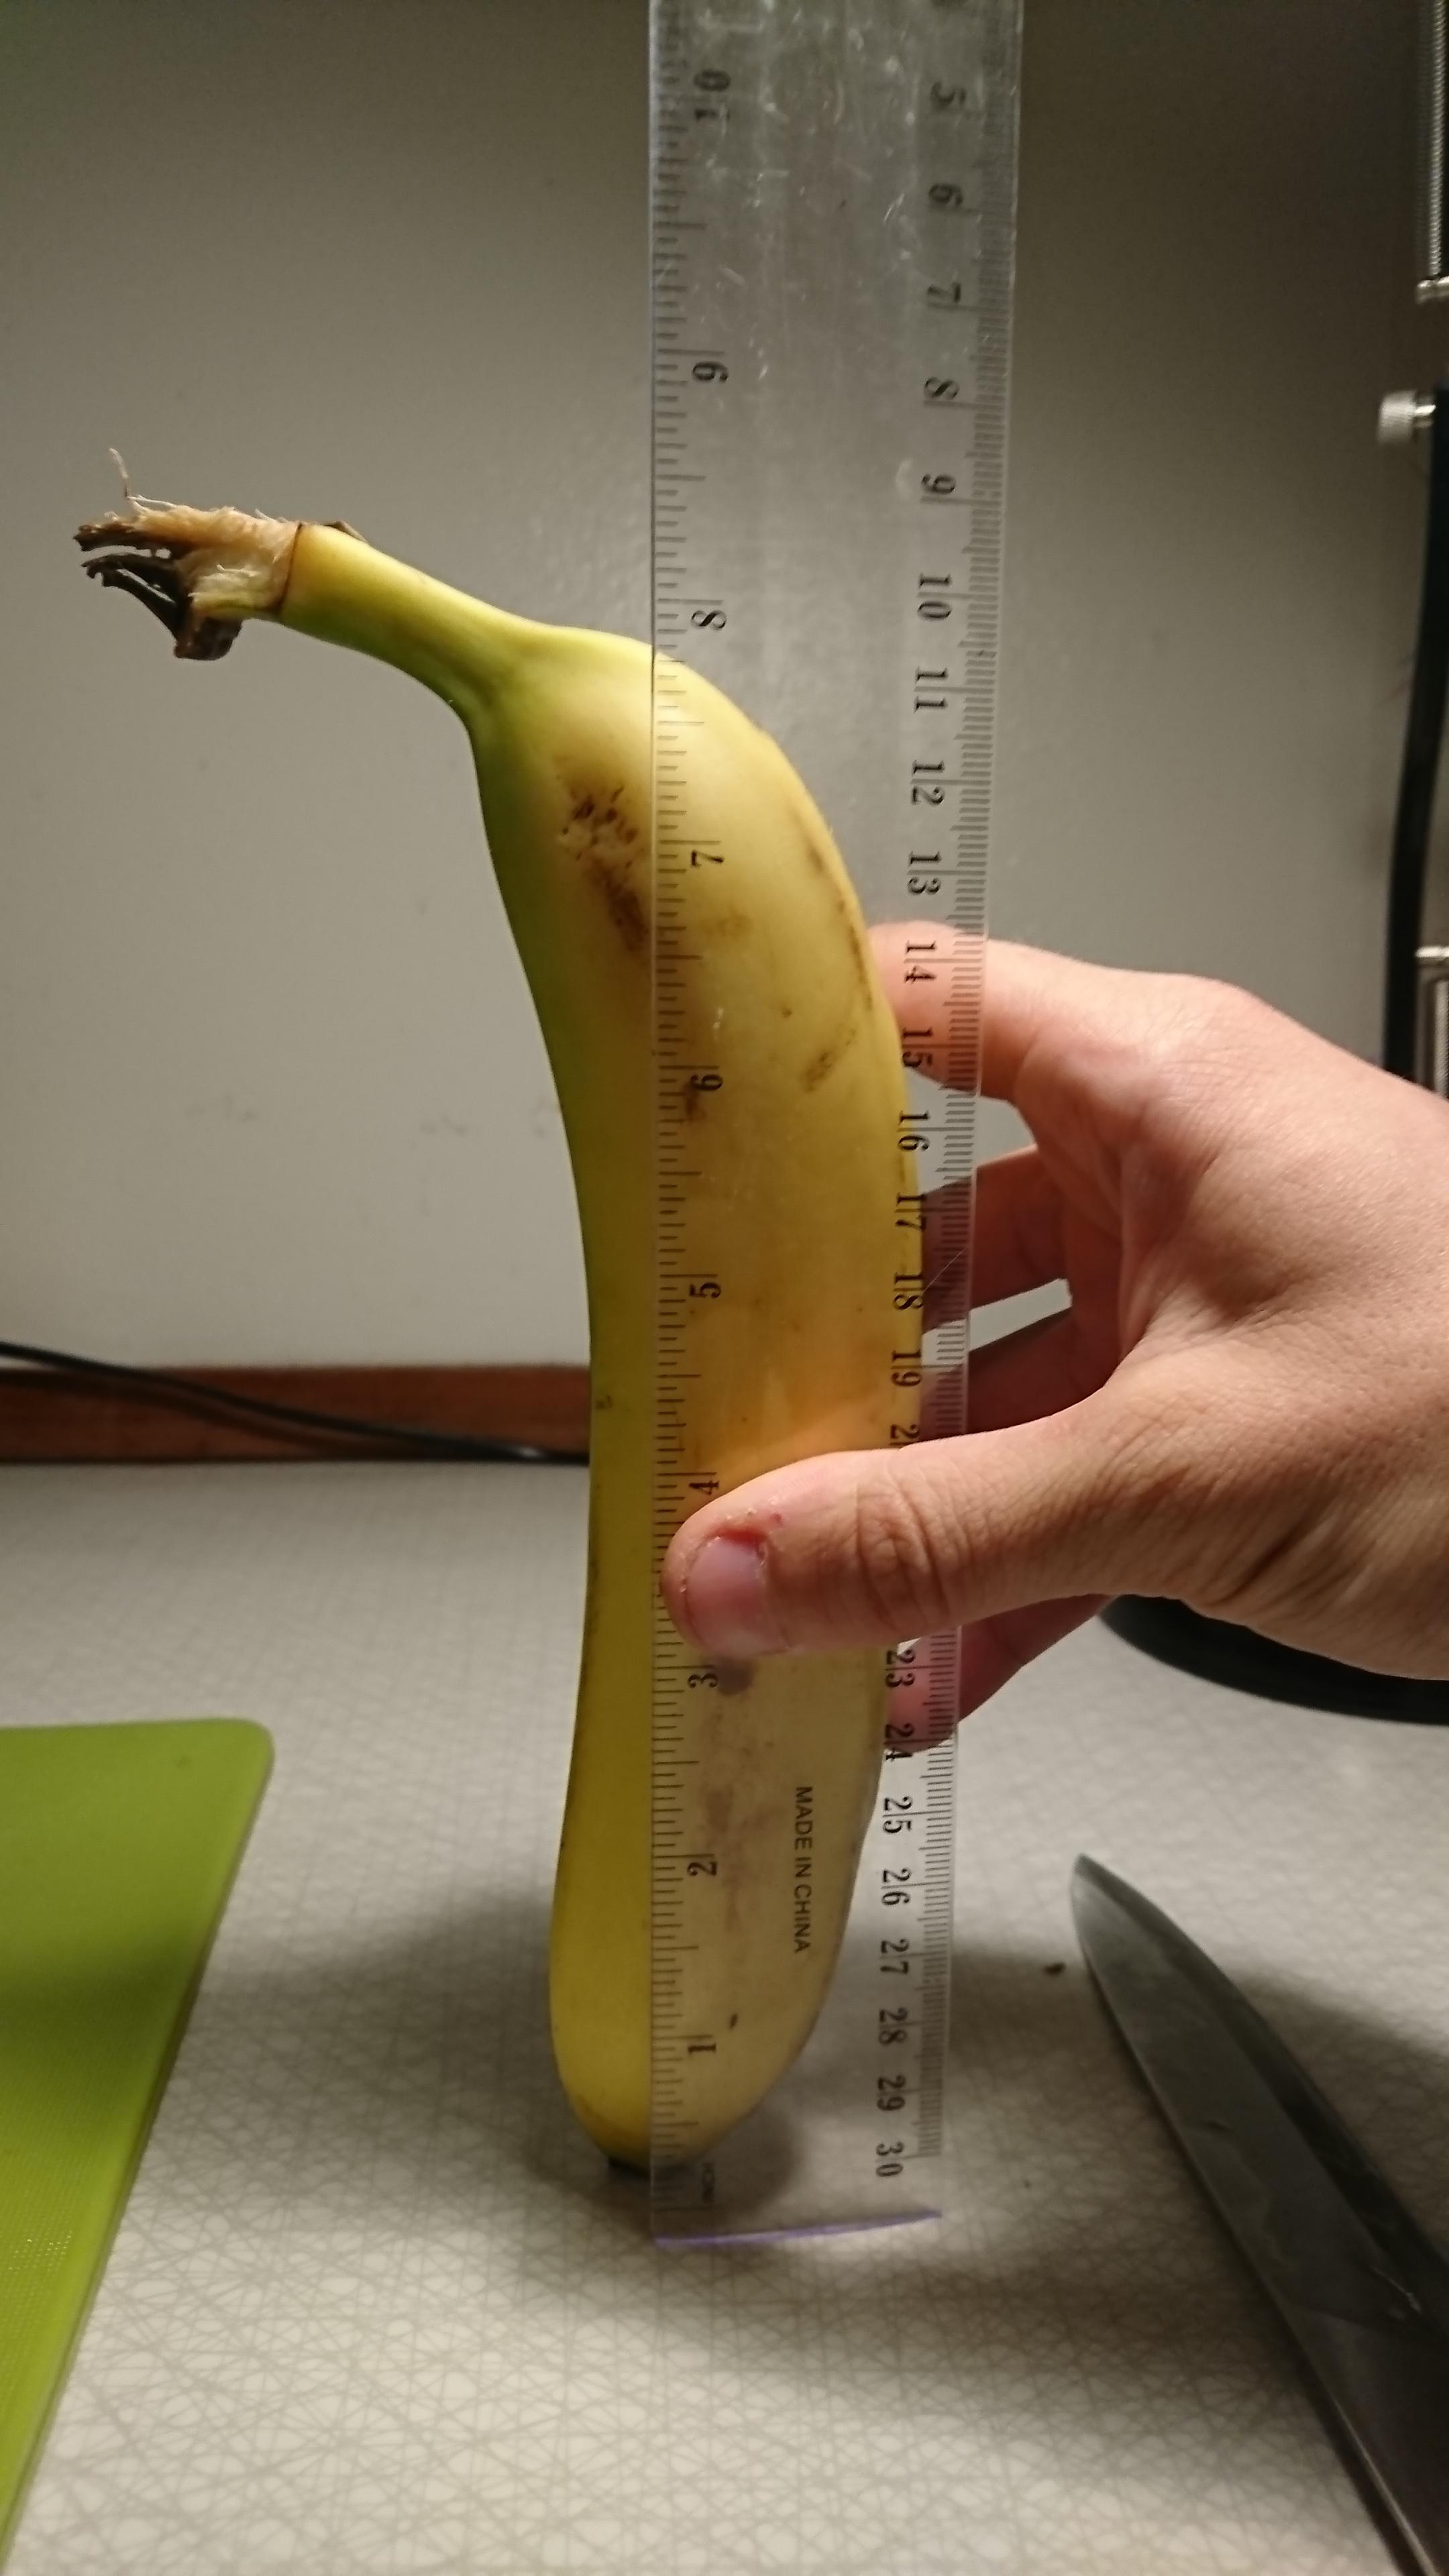 "Scale for banana, Freedom units."